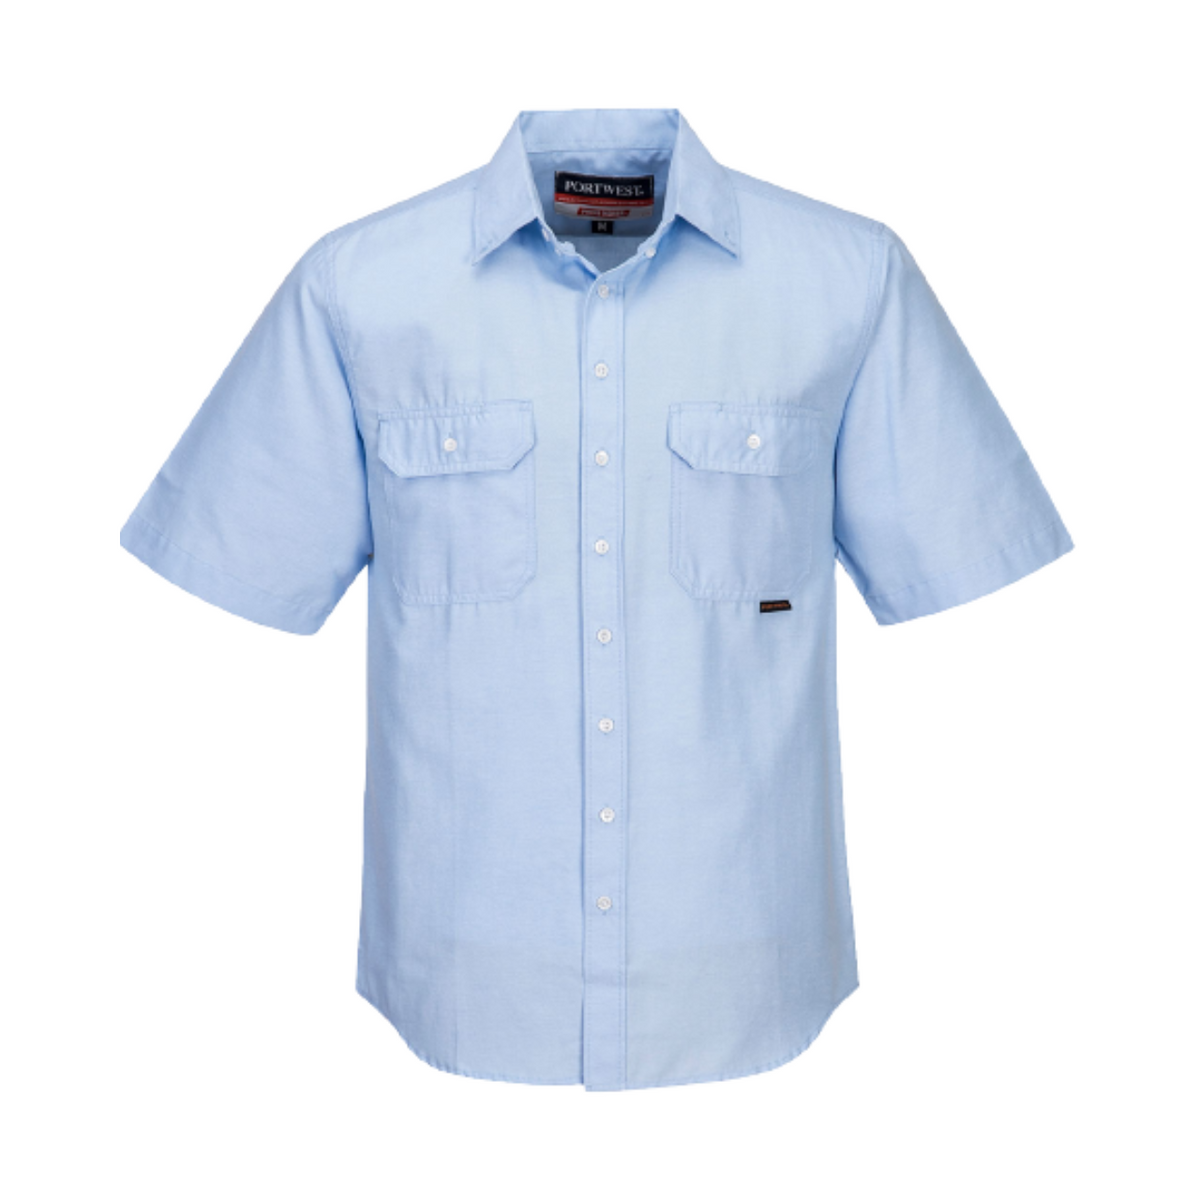 Portwest Adelaide Shirt, Short Sleeve, Light Weight Button Front Closure MS869-Collins Clothing Co